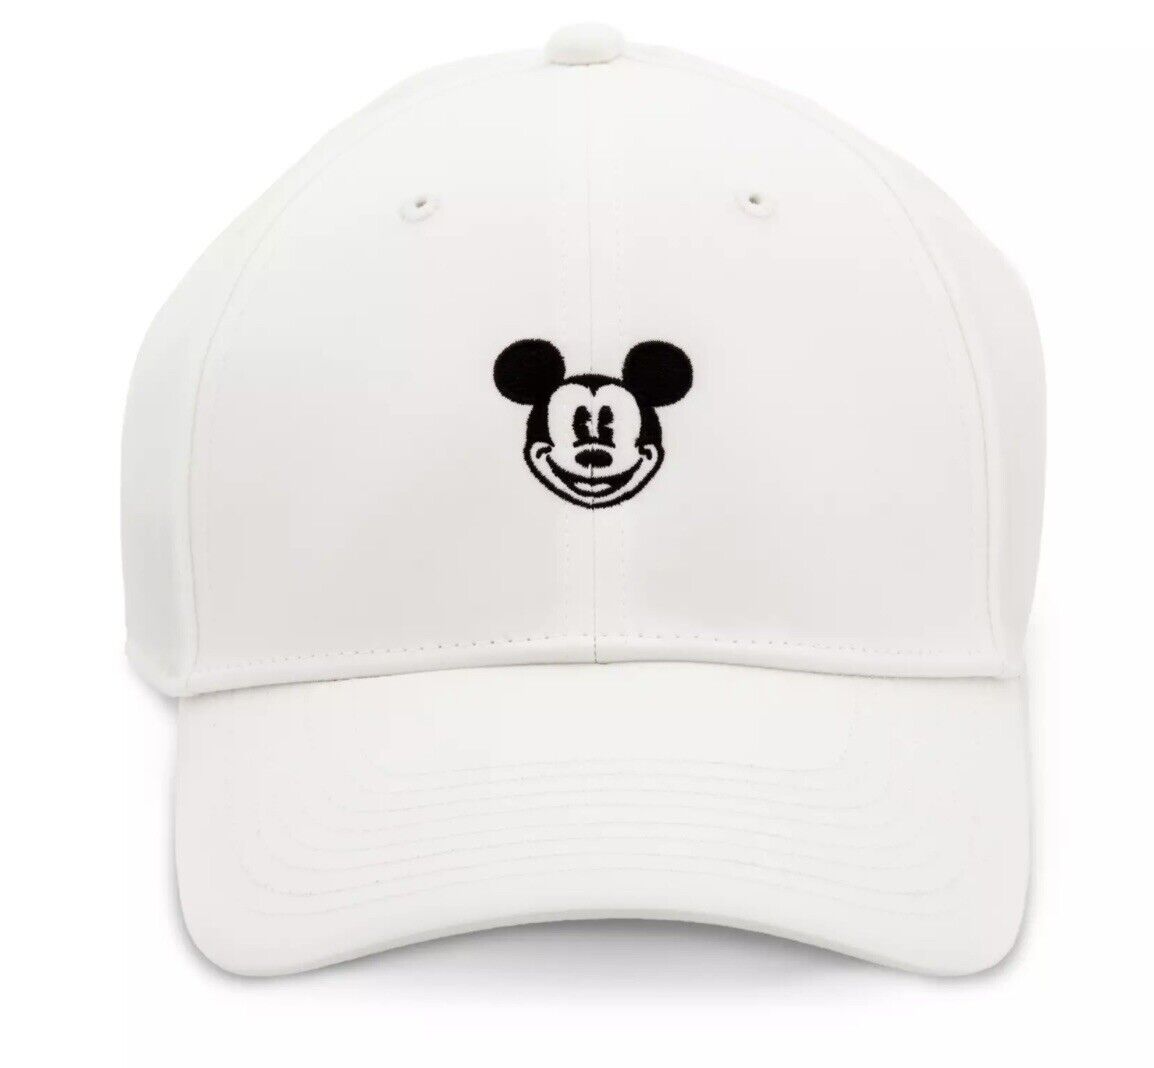 Disney Parks Nike Classic Mickey Dri-Fit Golf Baseball Hat White Exclusive - NEW